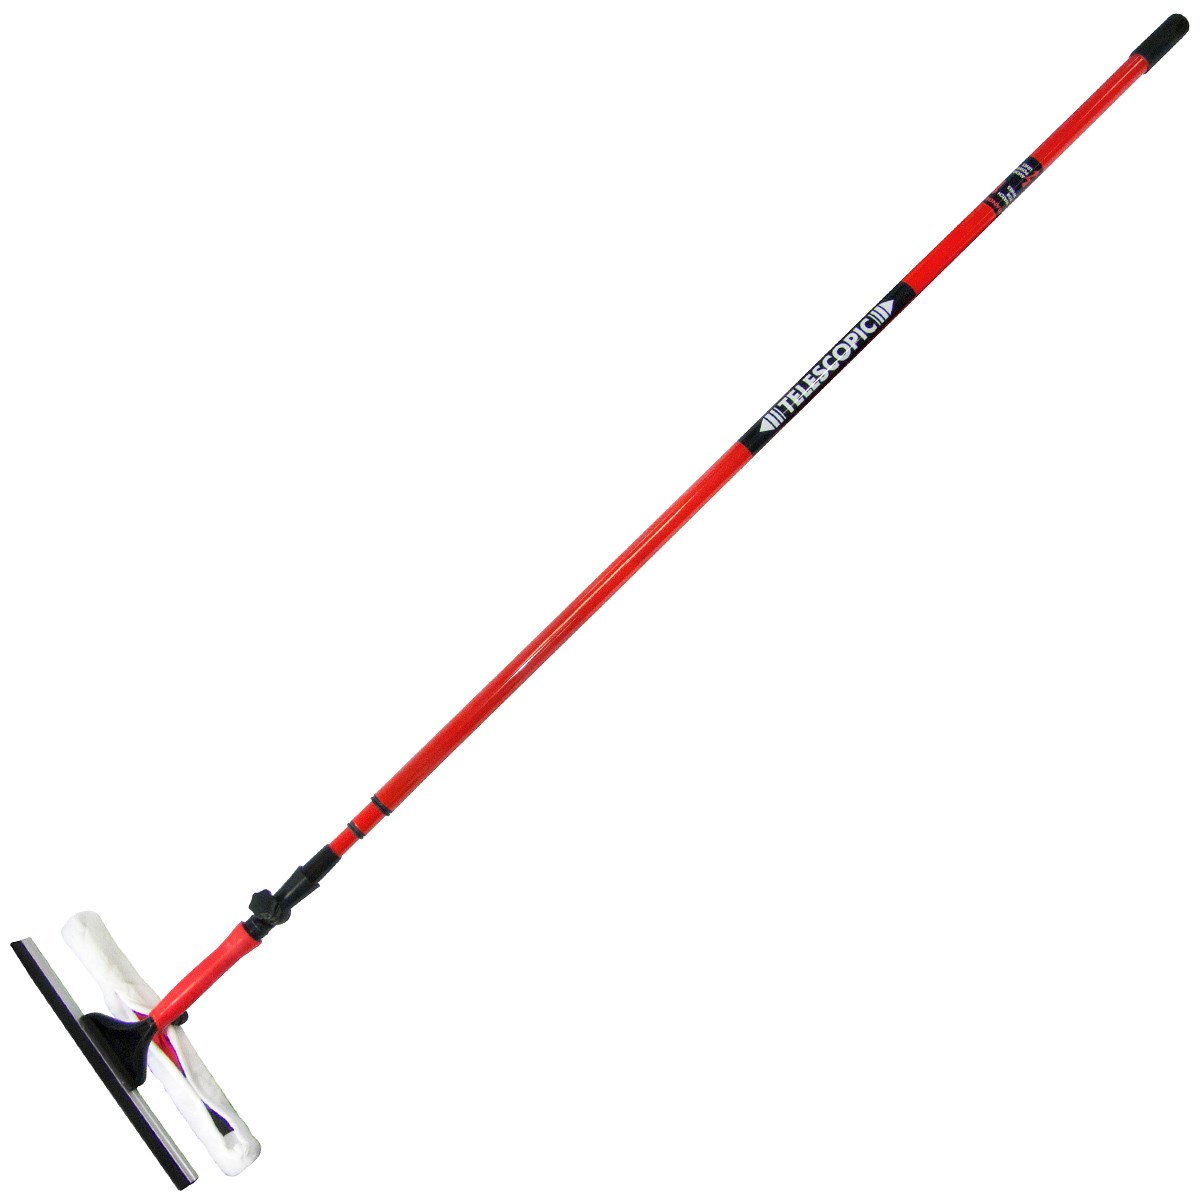 5METRE TELESCOPIC WINDOW CLEANER KITS,GLASS CLEANER,WINDOW CLEANING POLE  SYSTEM